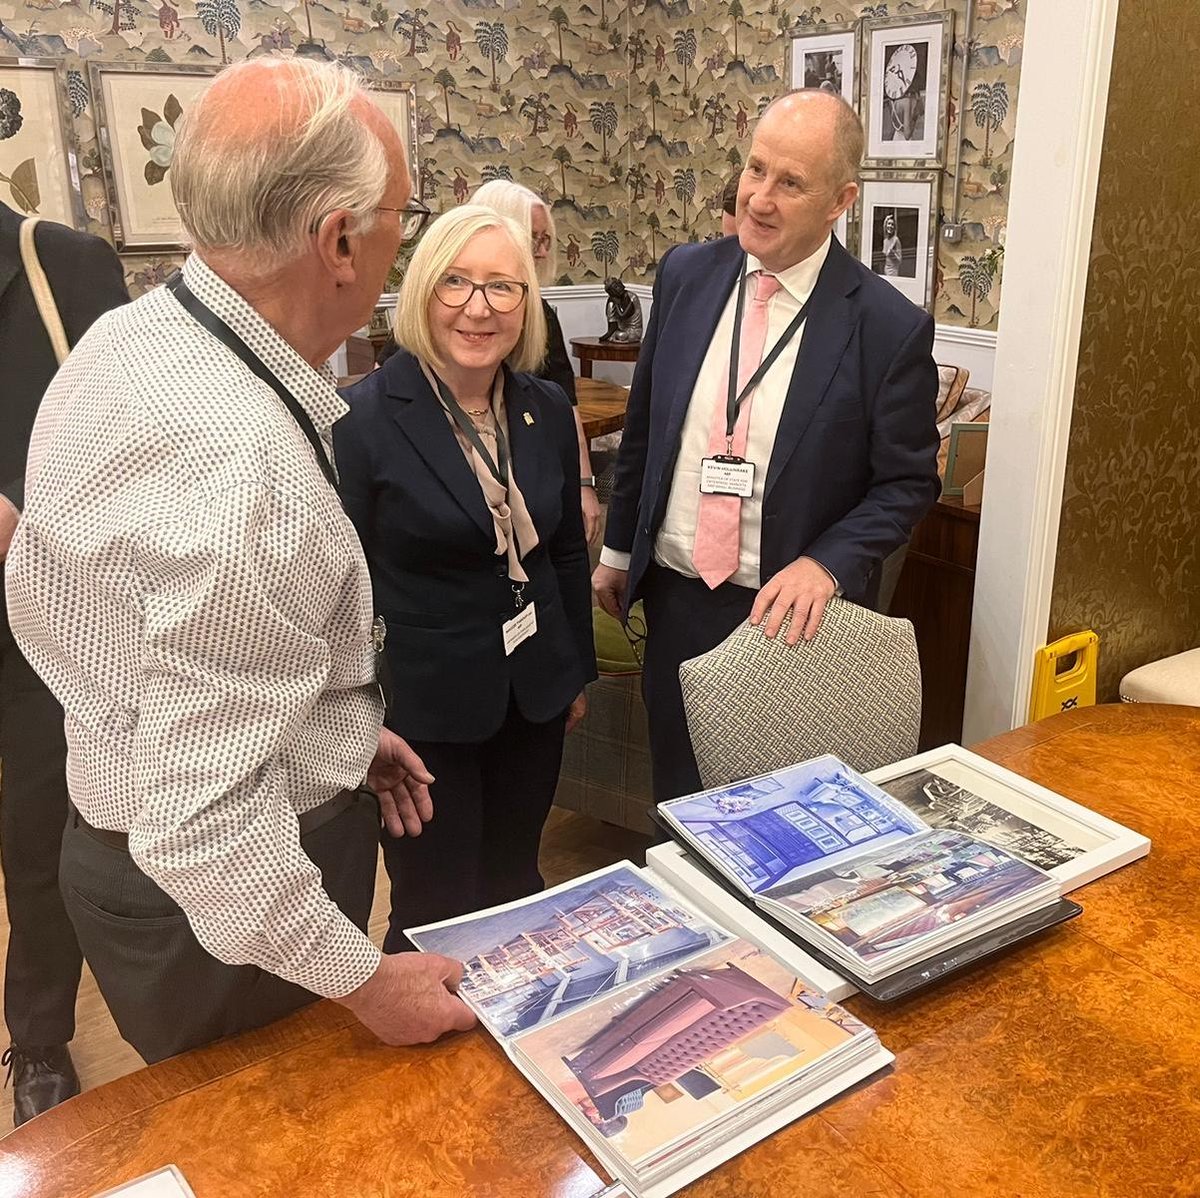 Thanks to @kevinhollinrake for travelling to #Erewash to meet with me and leaders from Long Eaton’s world-renowned upholstery industry to discuss the practicalities of the Government’s new fire regulations. I’m pleased that positive discussions were held